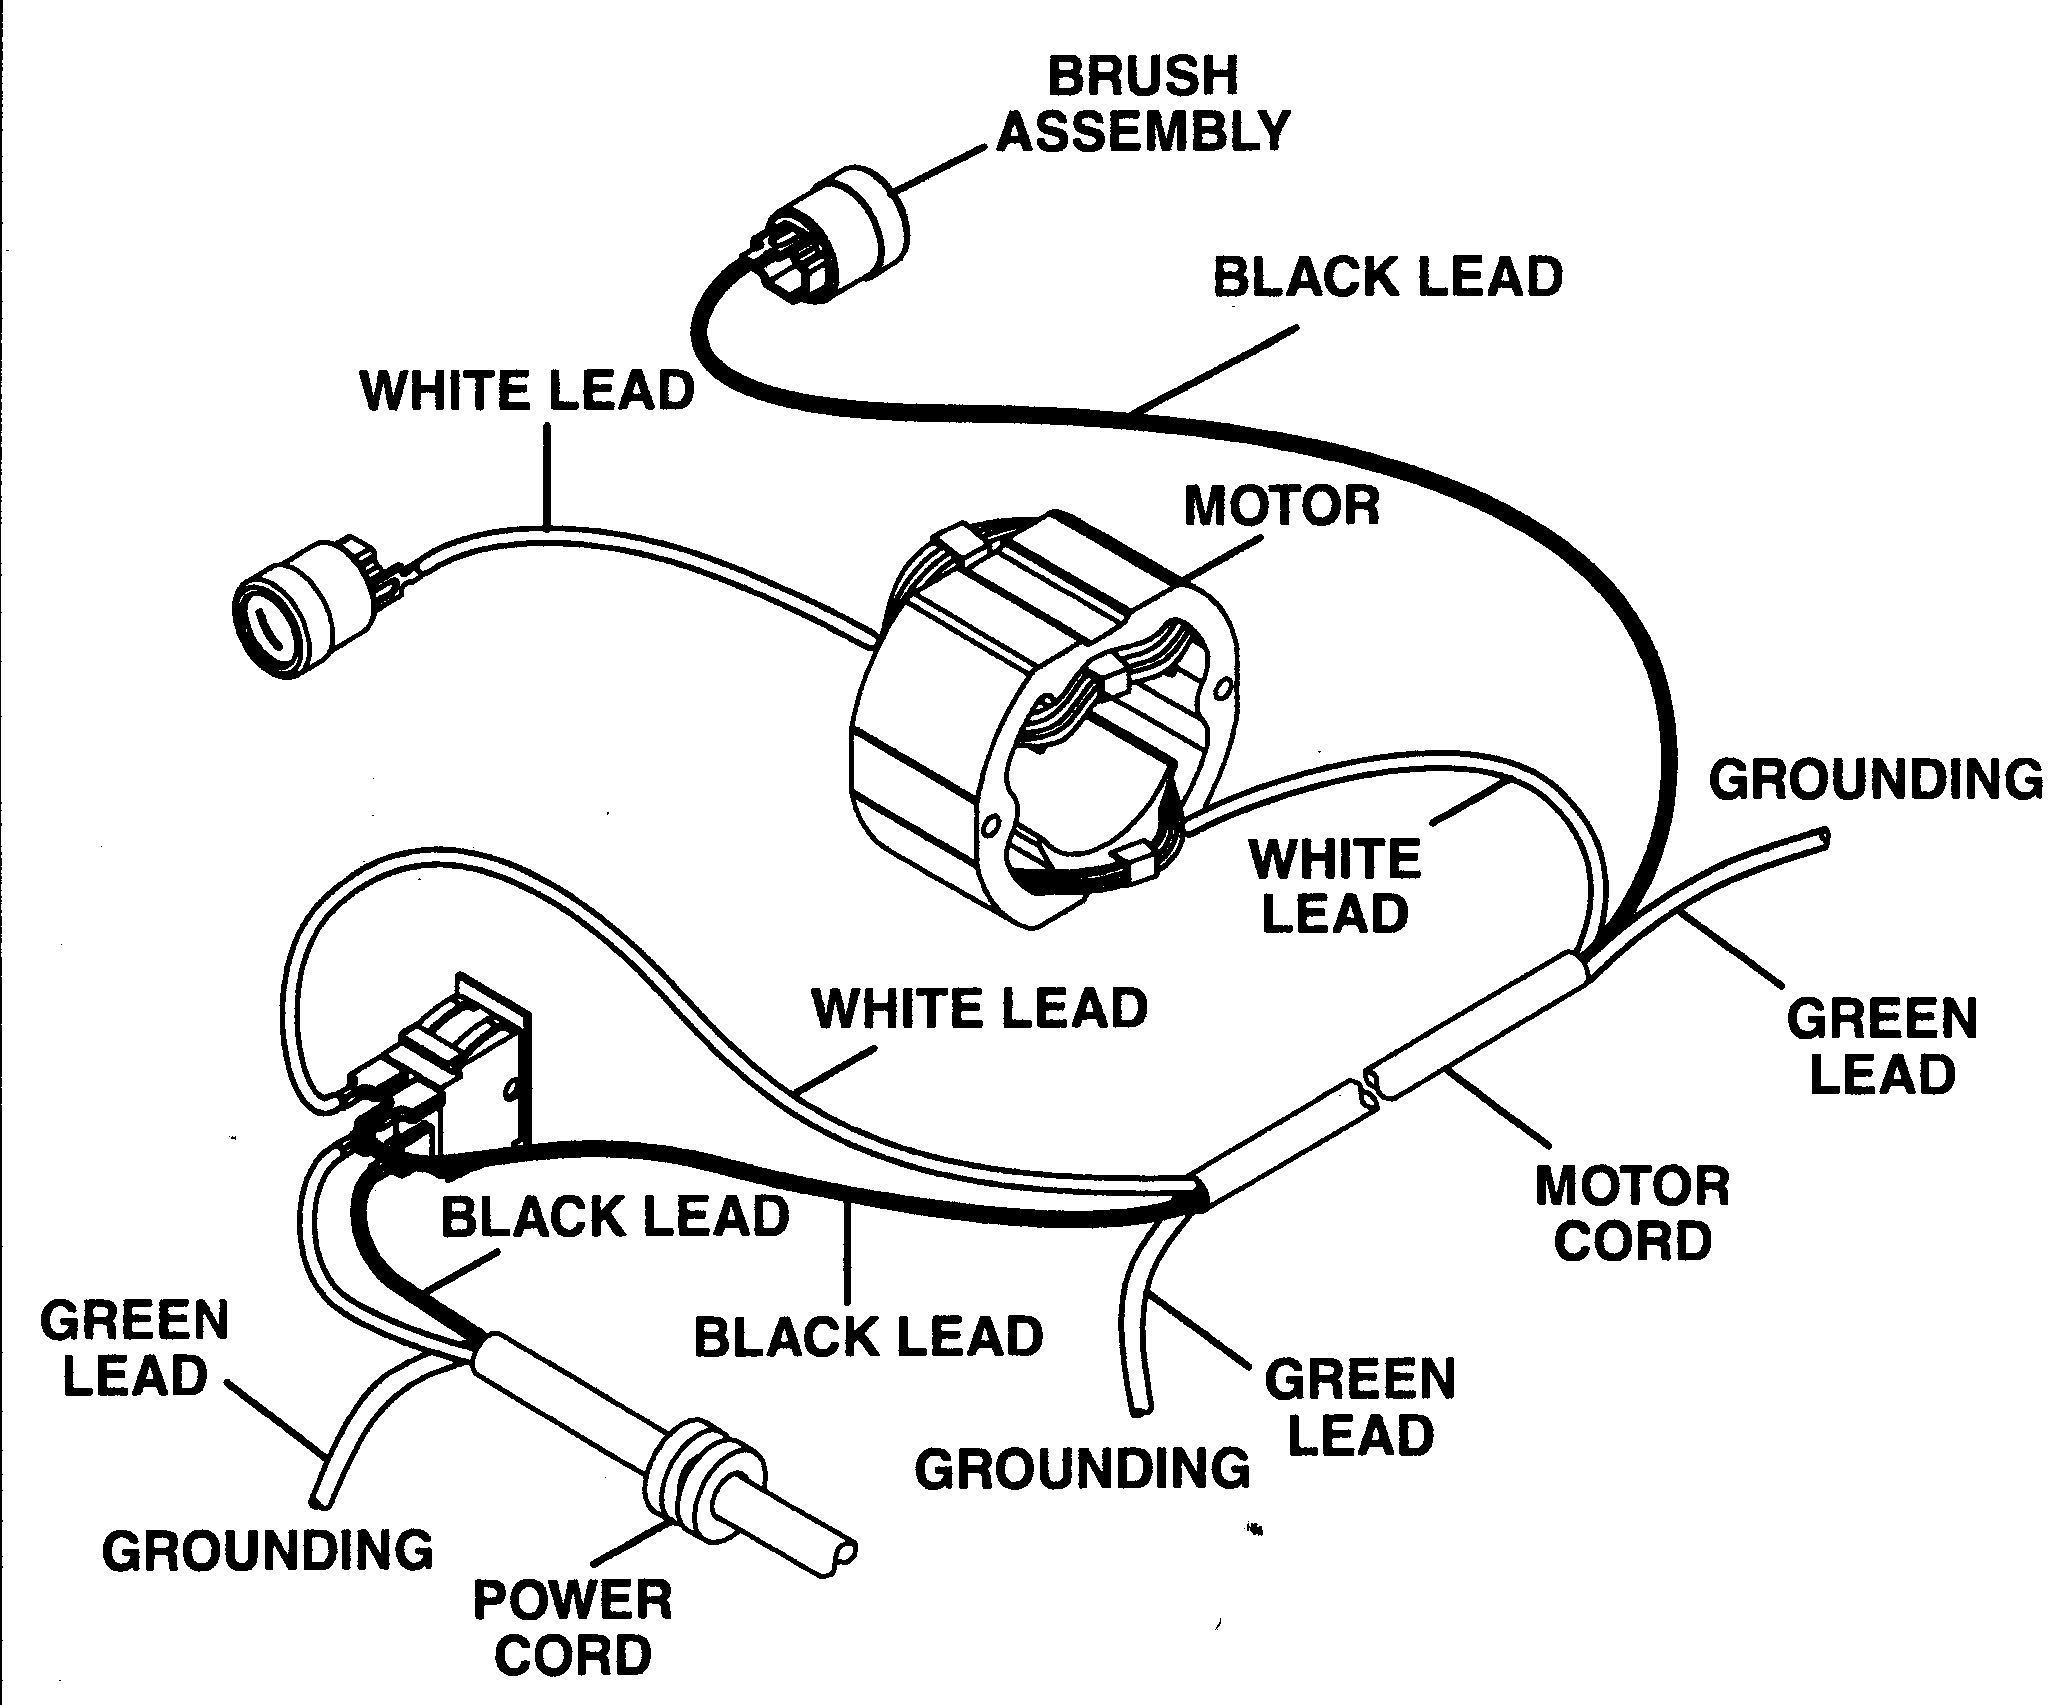 9 Lead Motor Wiring Diagram from c.searspartsdirect.com